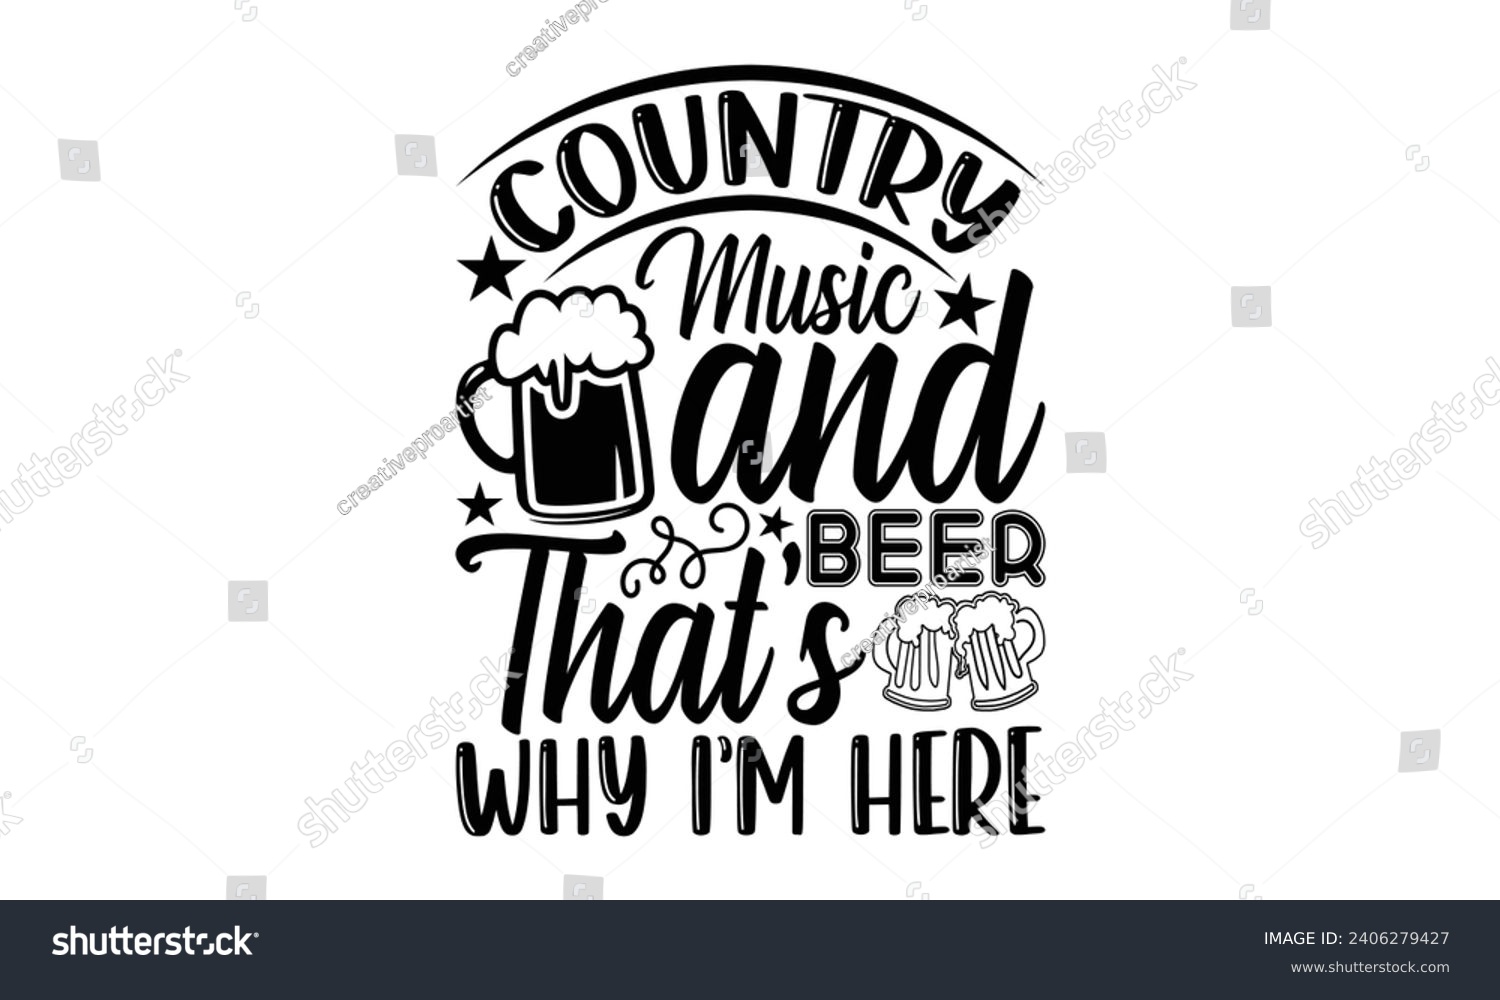 SVG of Country Music And Beer That’s Why I’m Here- Beer t- shirt design, Handmade calligraphy vector illustration for Cutting Machine, Silhouette Cameo, Cricut, Vector illustration Template. svg